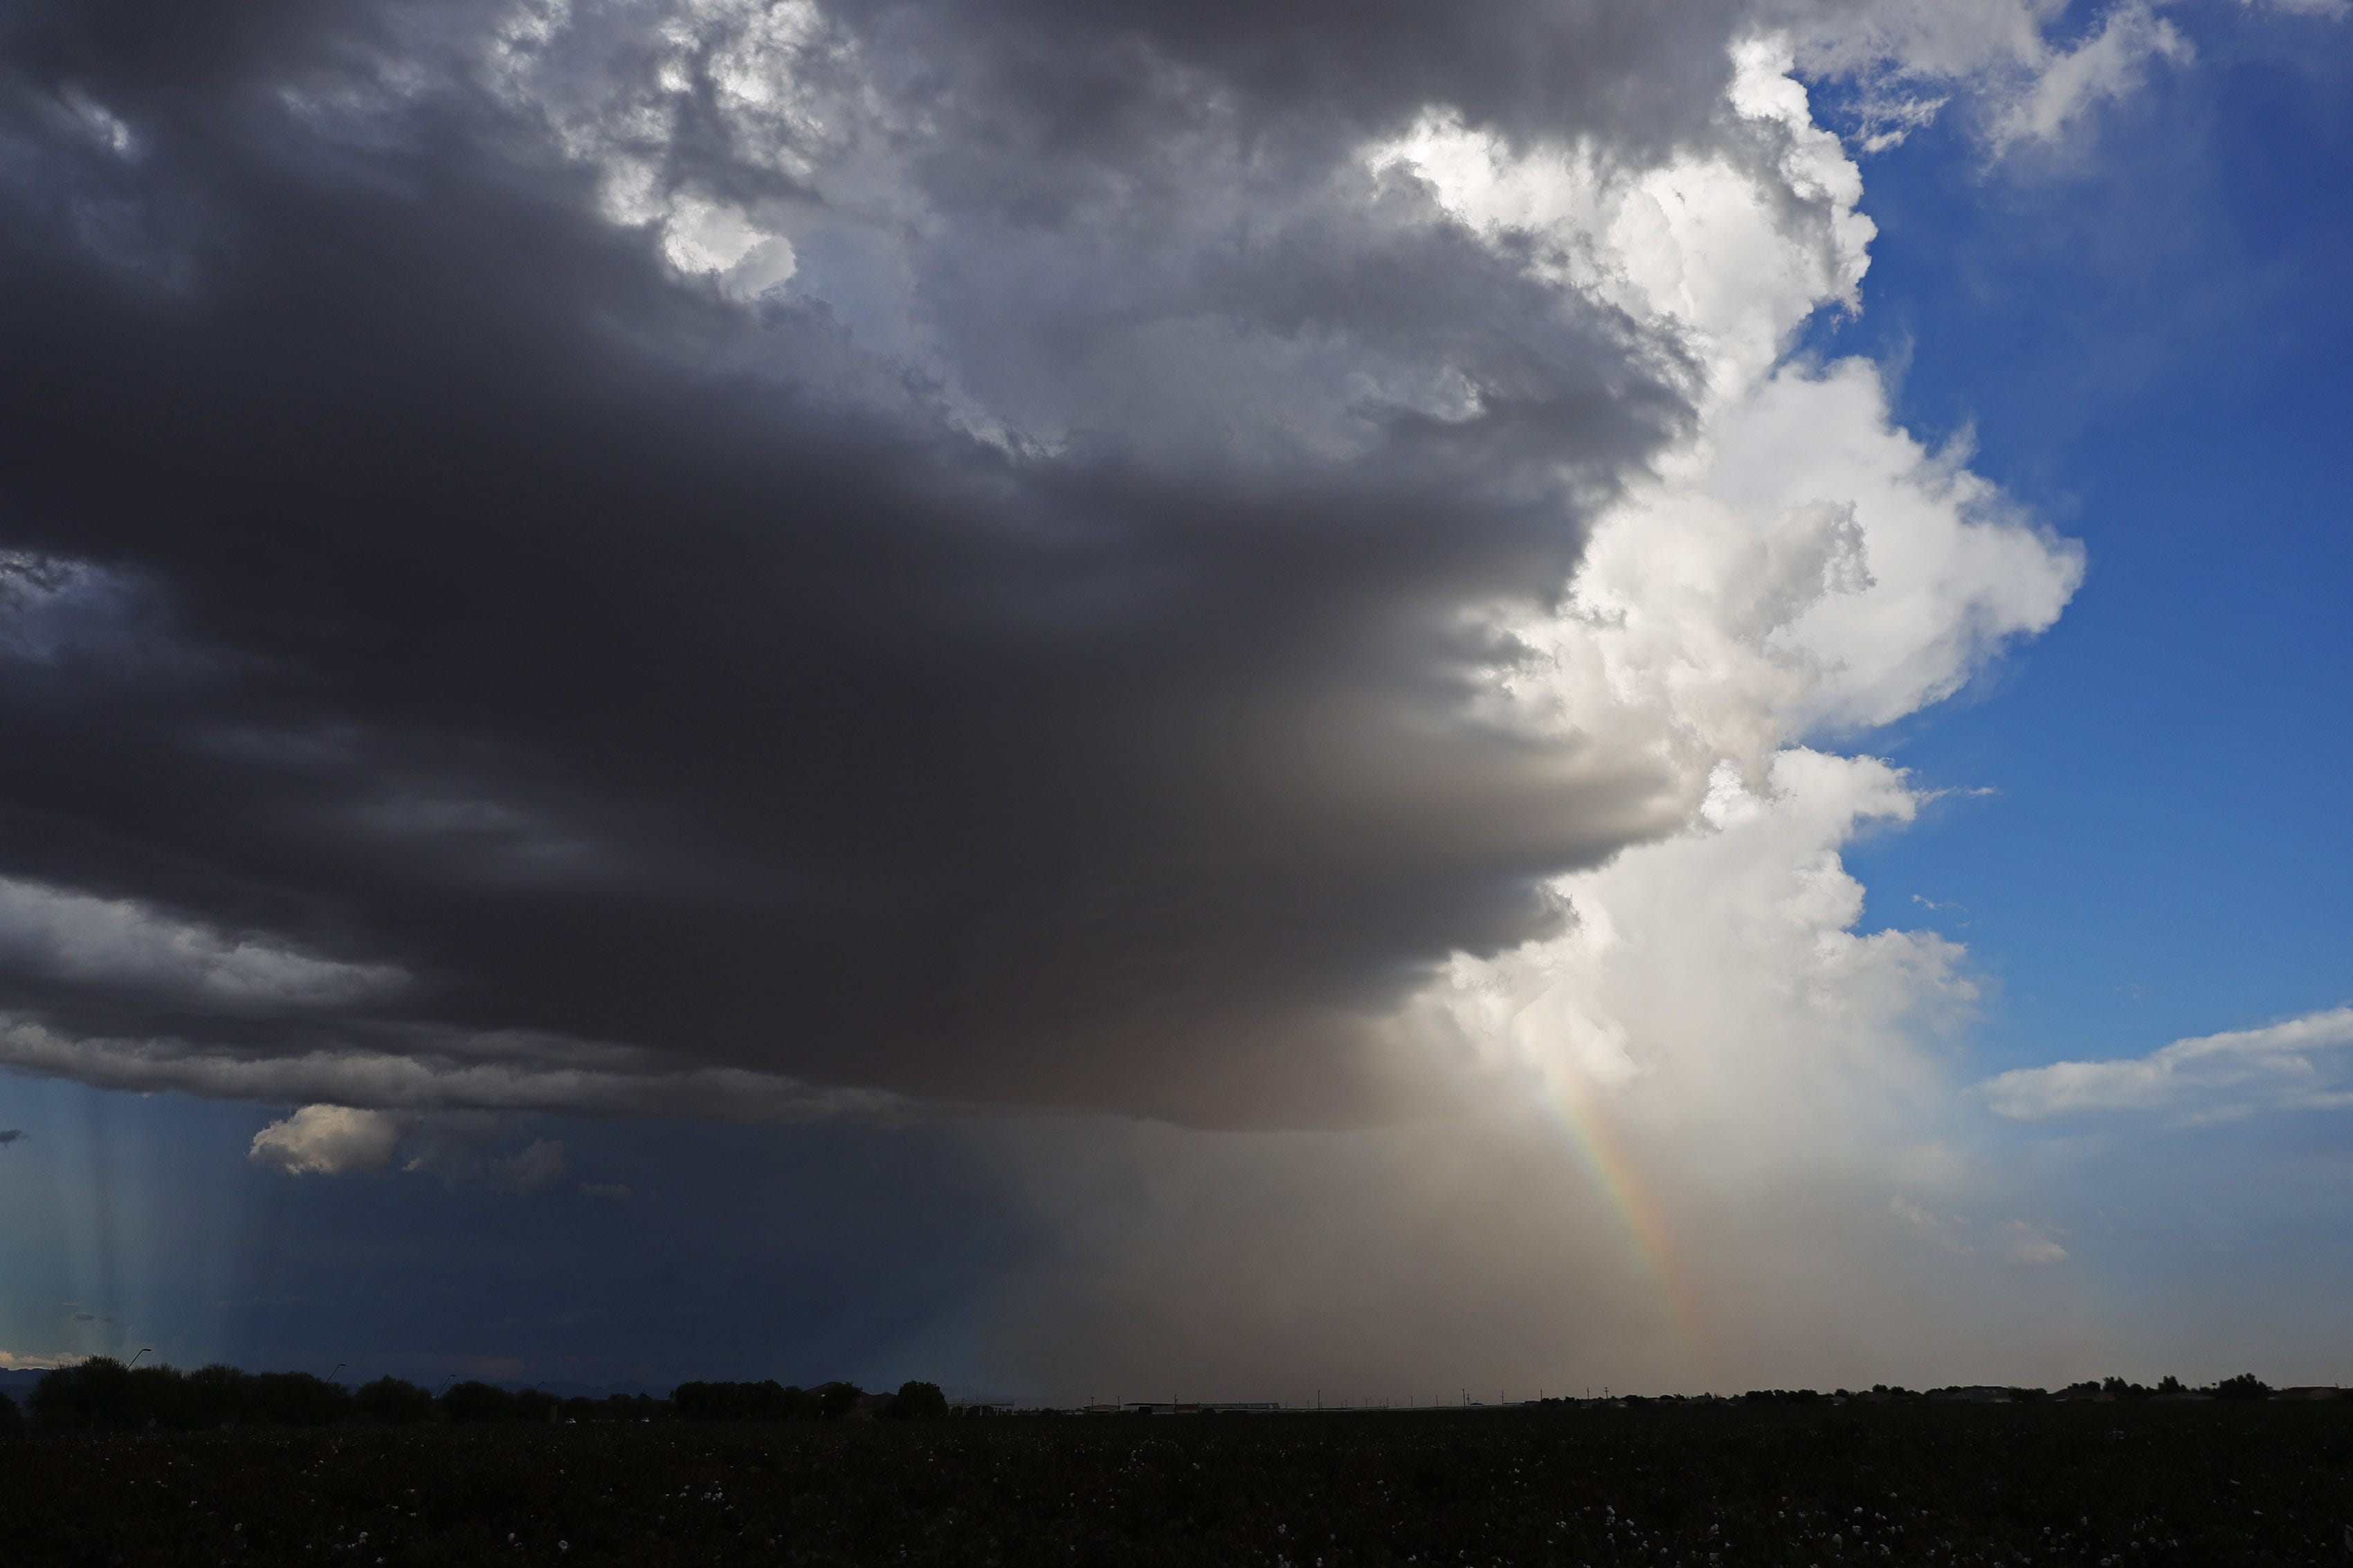 Phoenix area can expect severe thunderstorms and a chance of hail until Tuesday